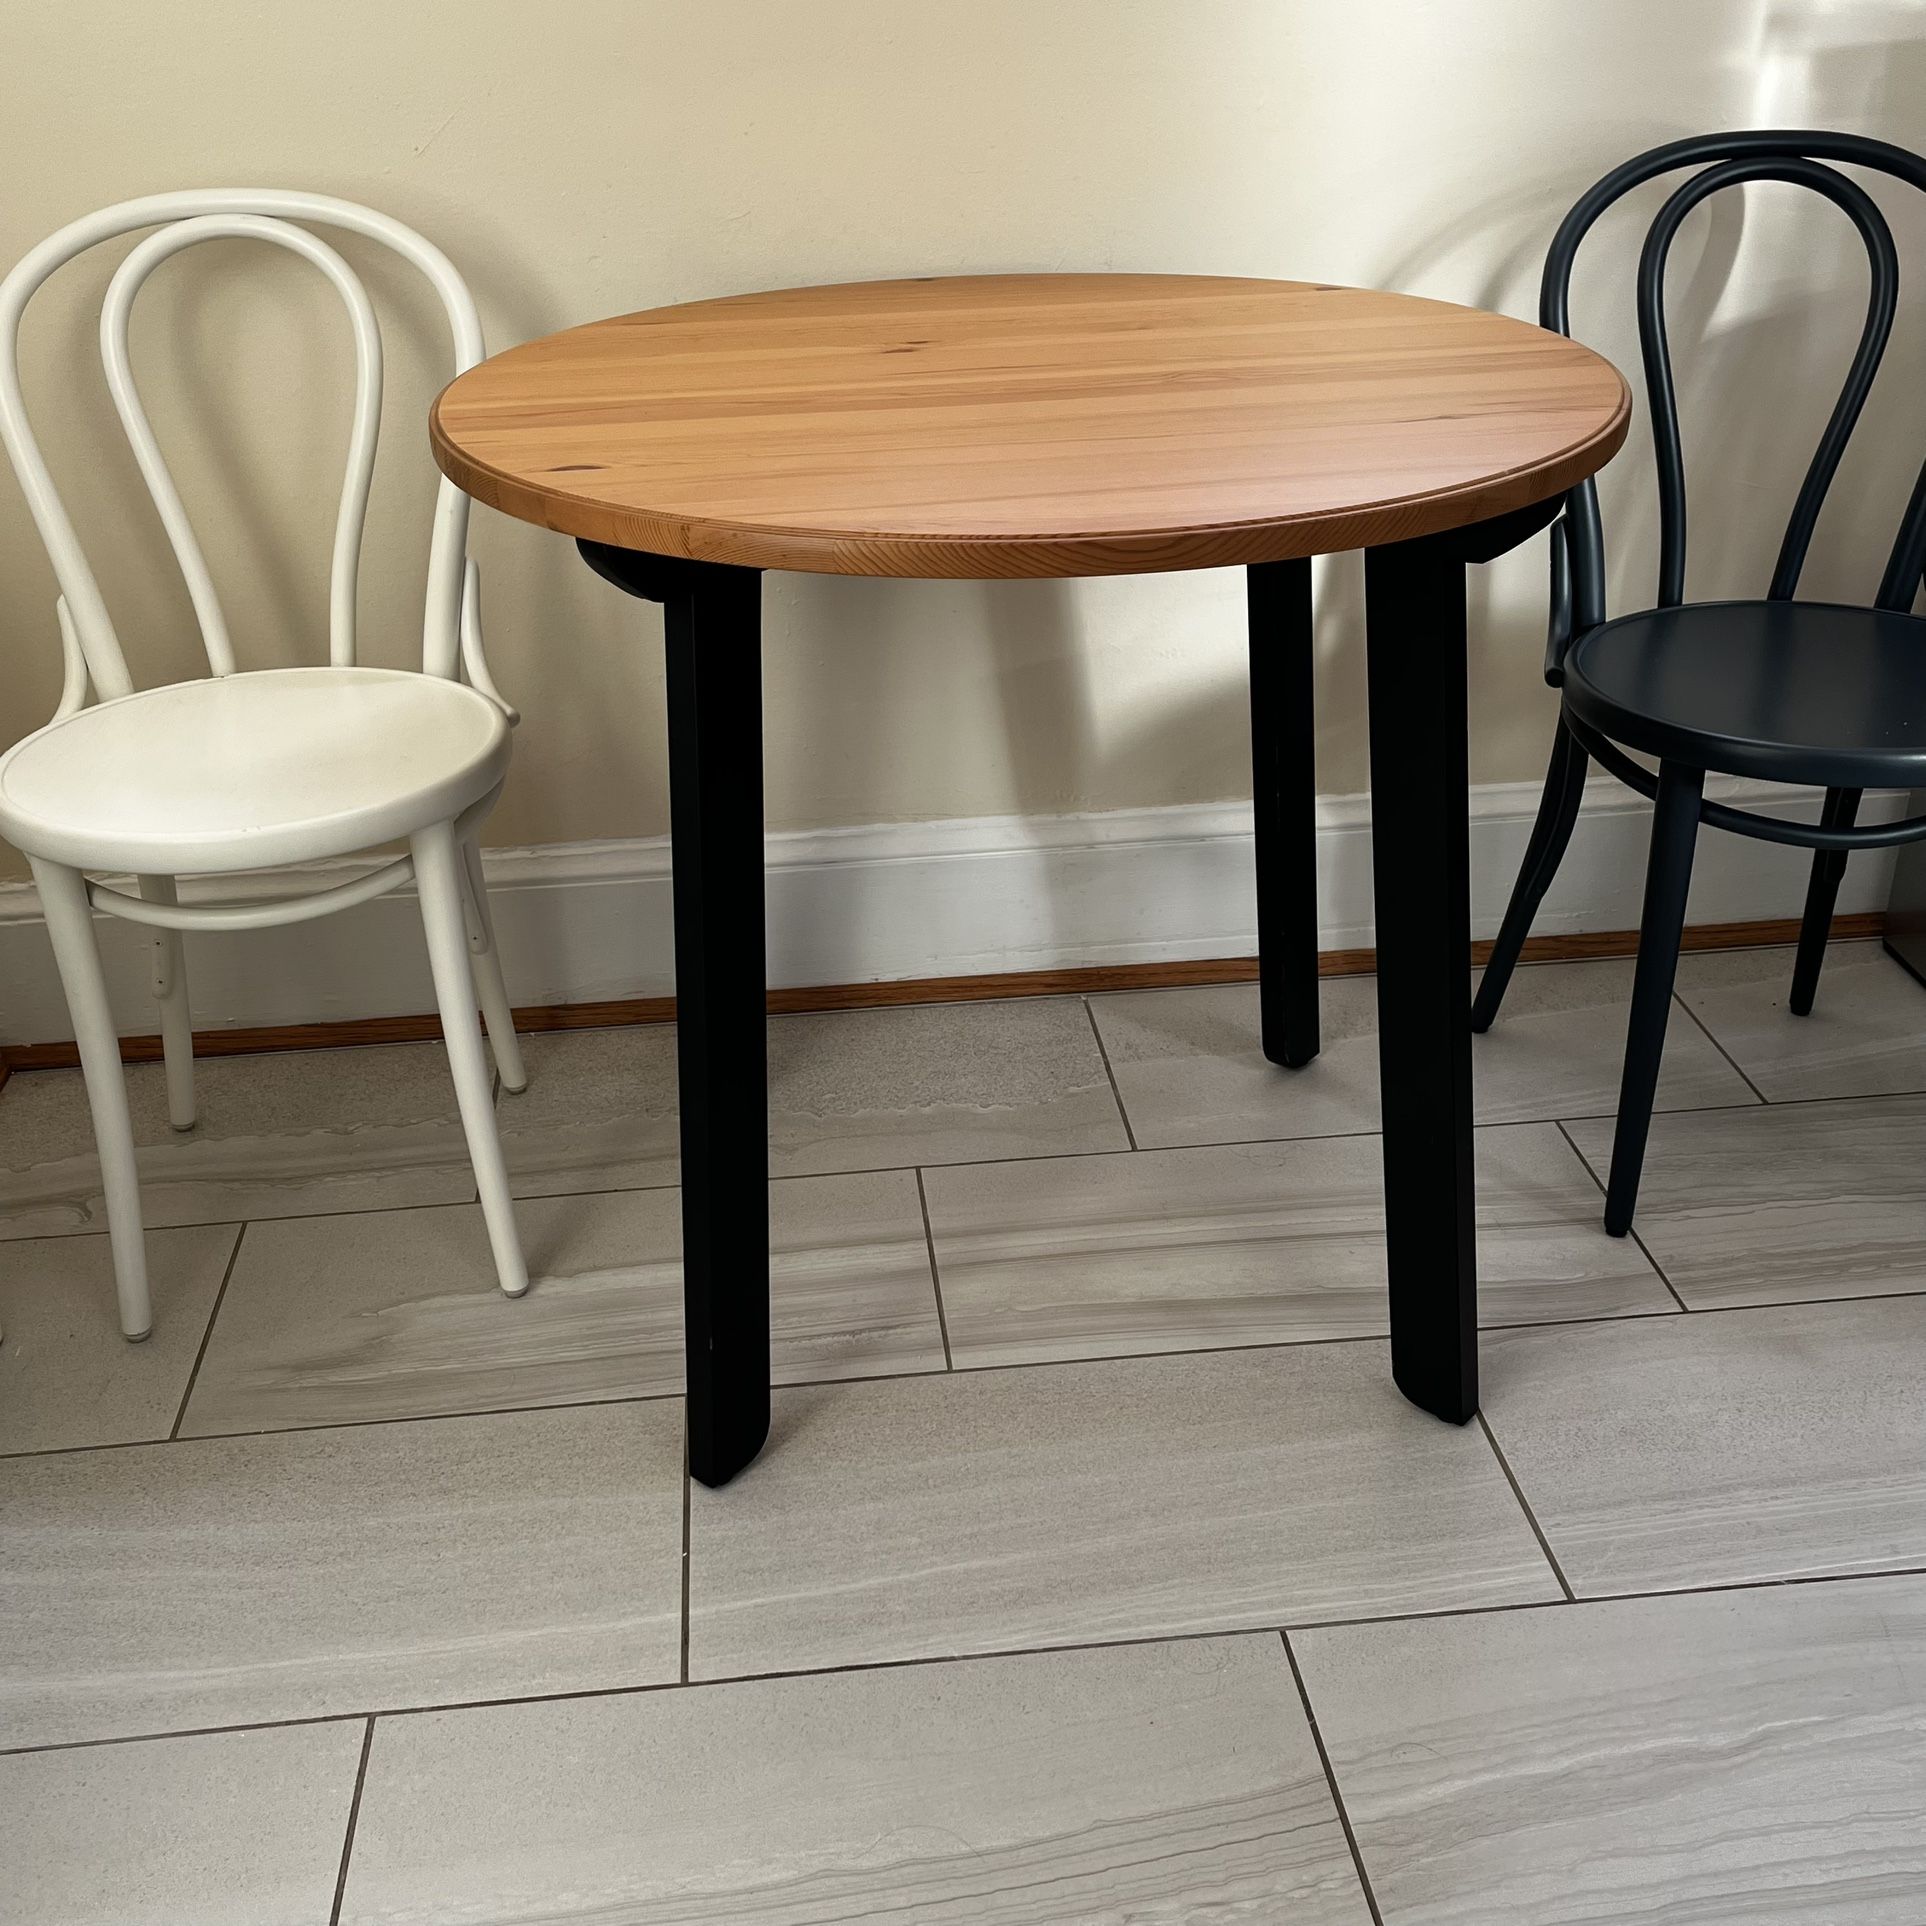 Ikea Round Dining Table 